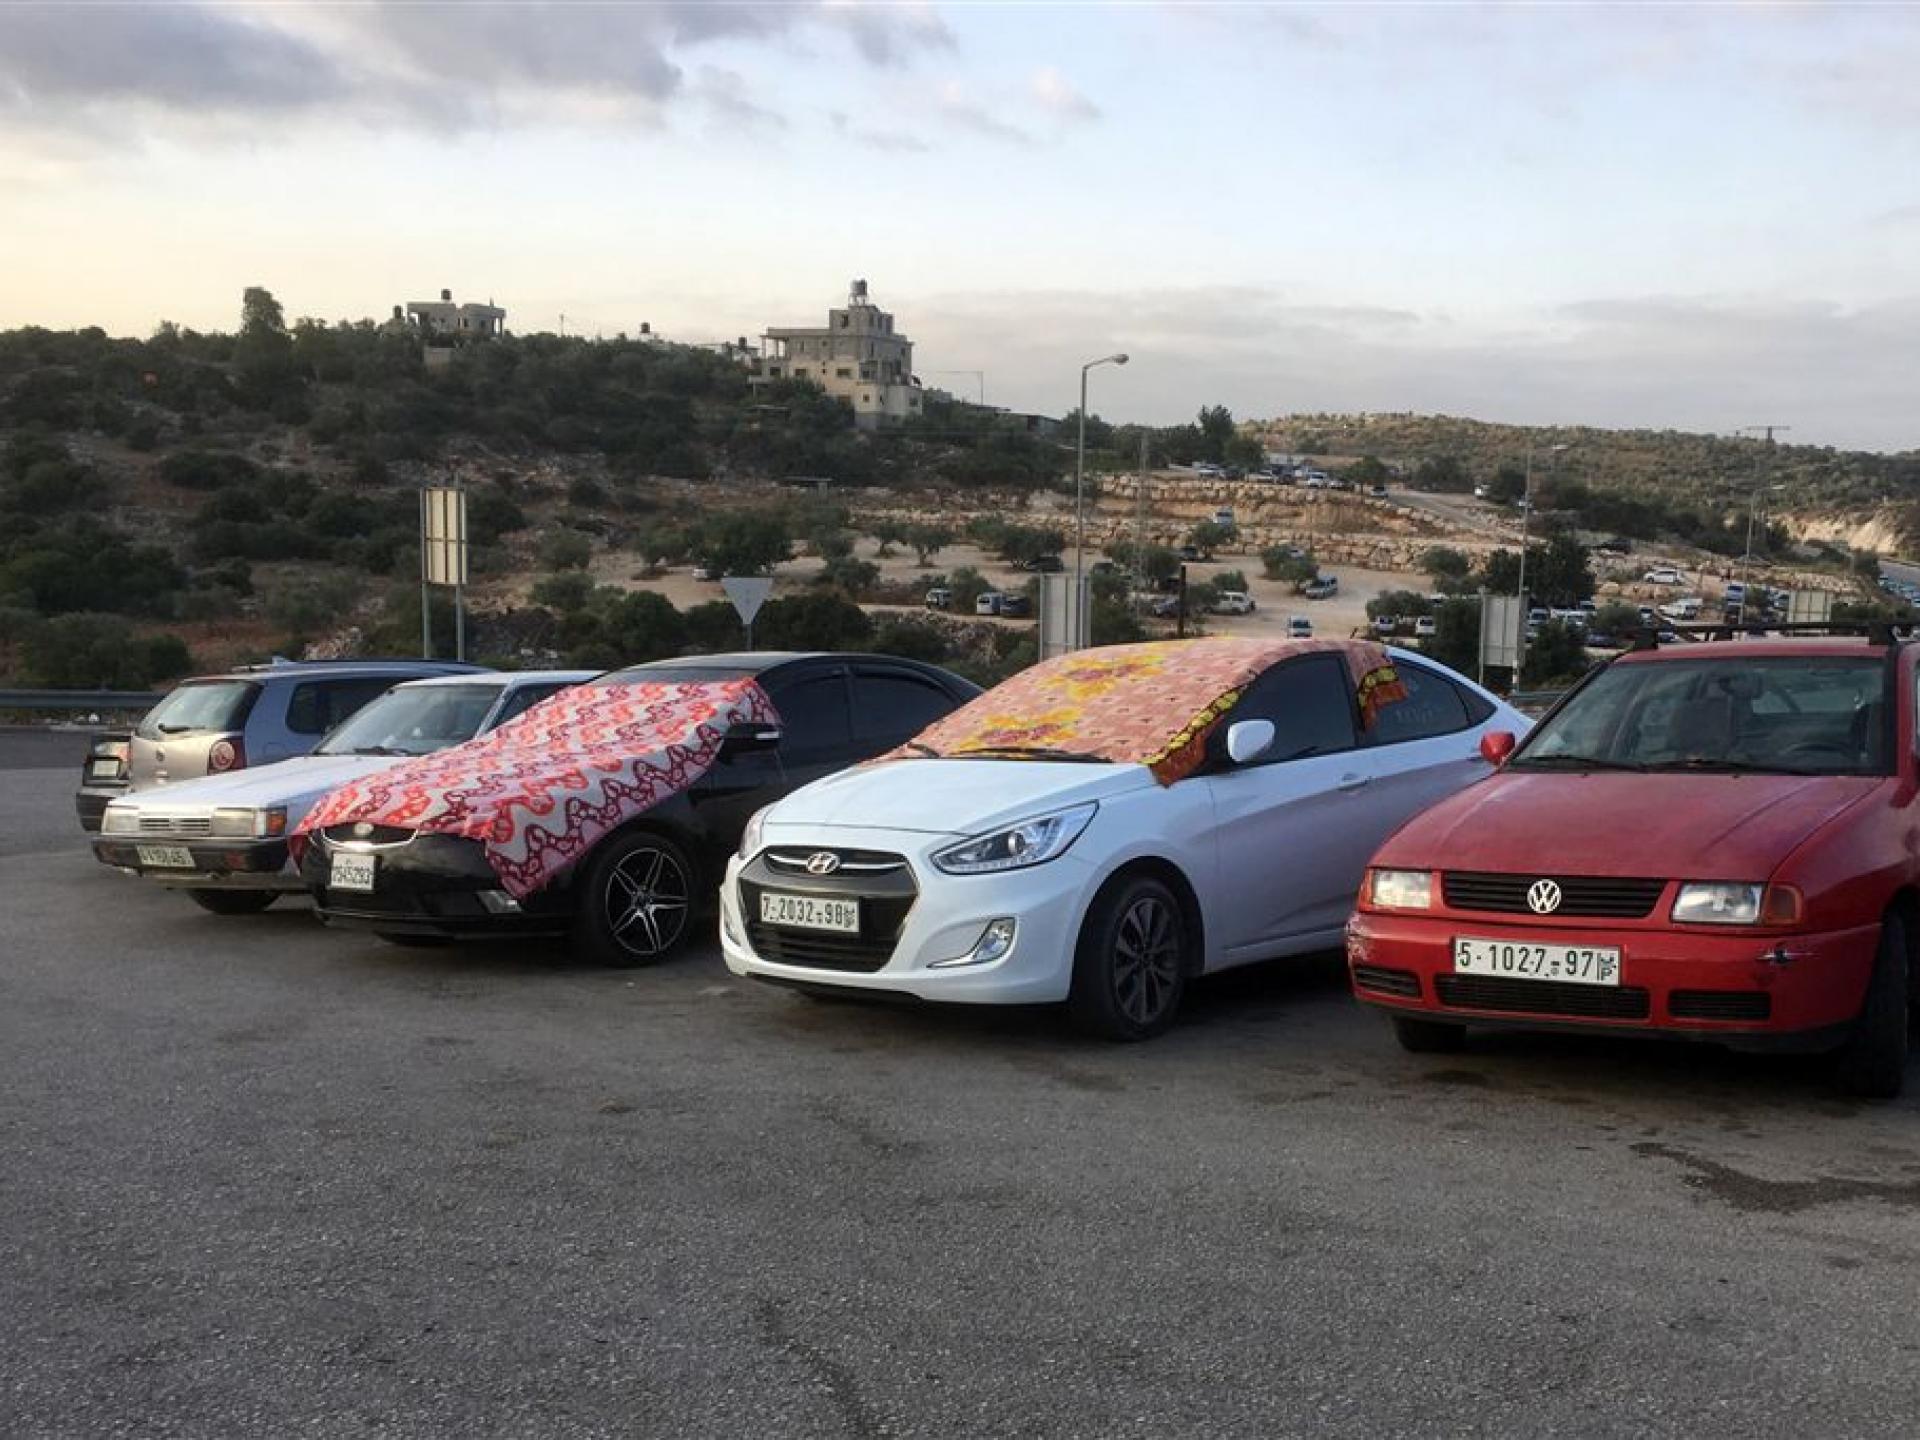 Barta’a checkpoint 3.7.2018: Pampered cars …